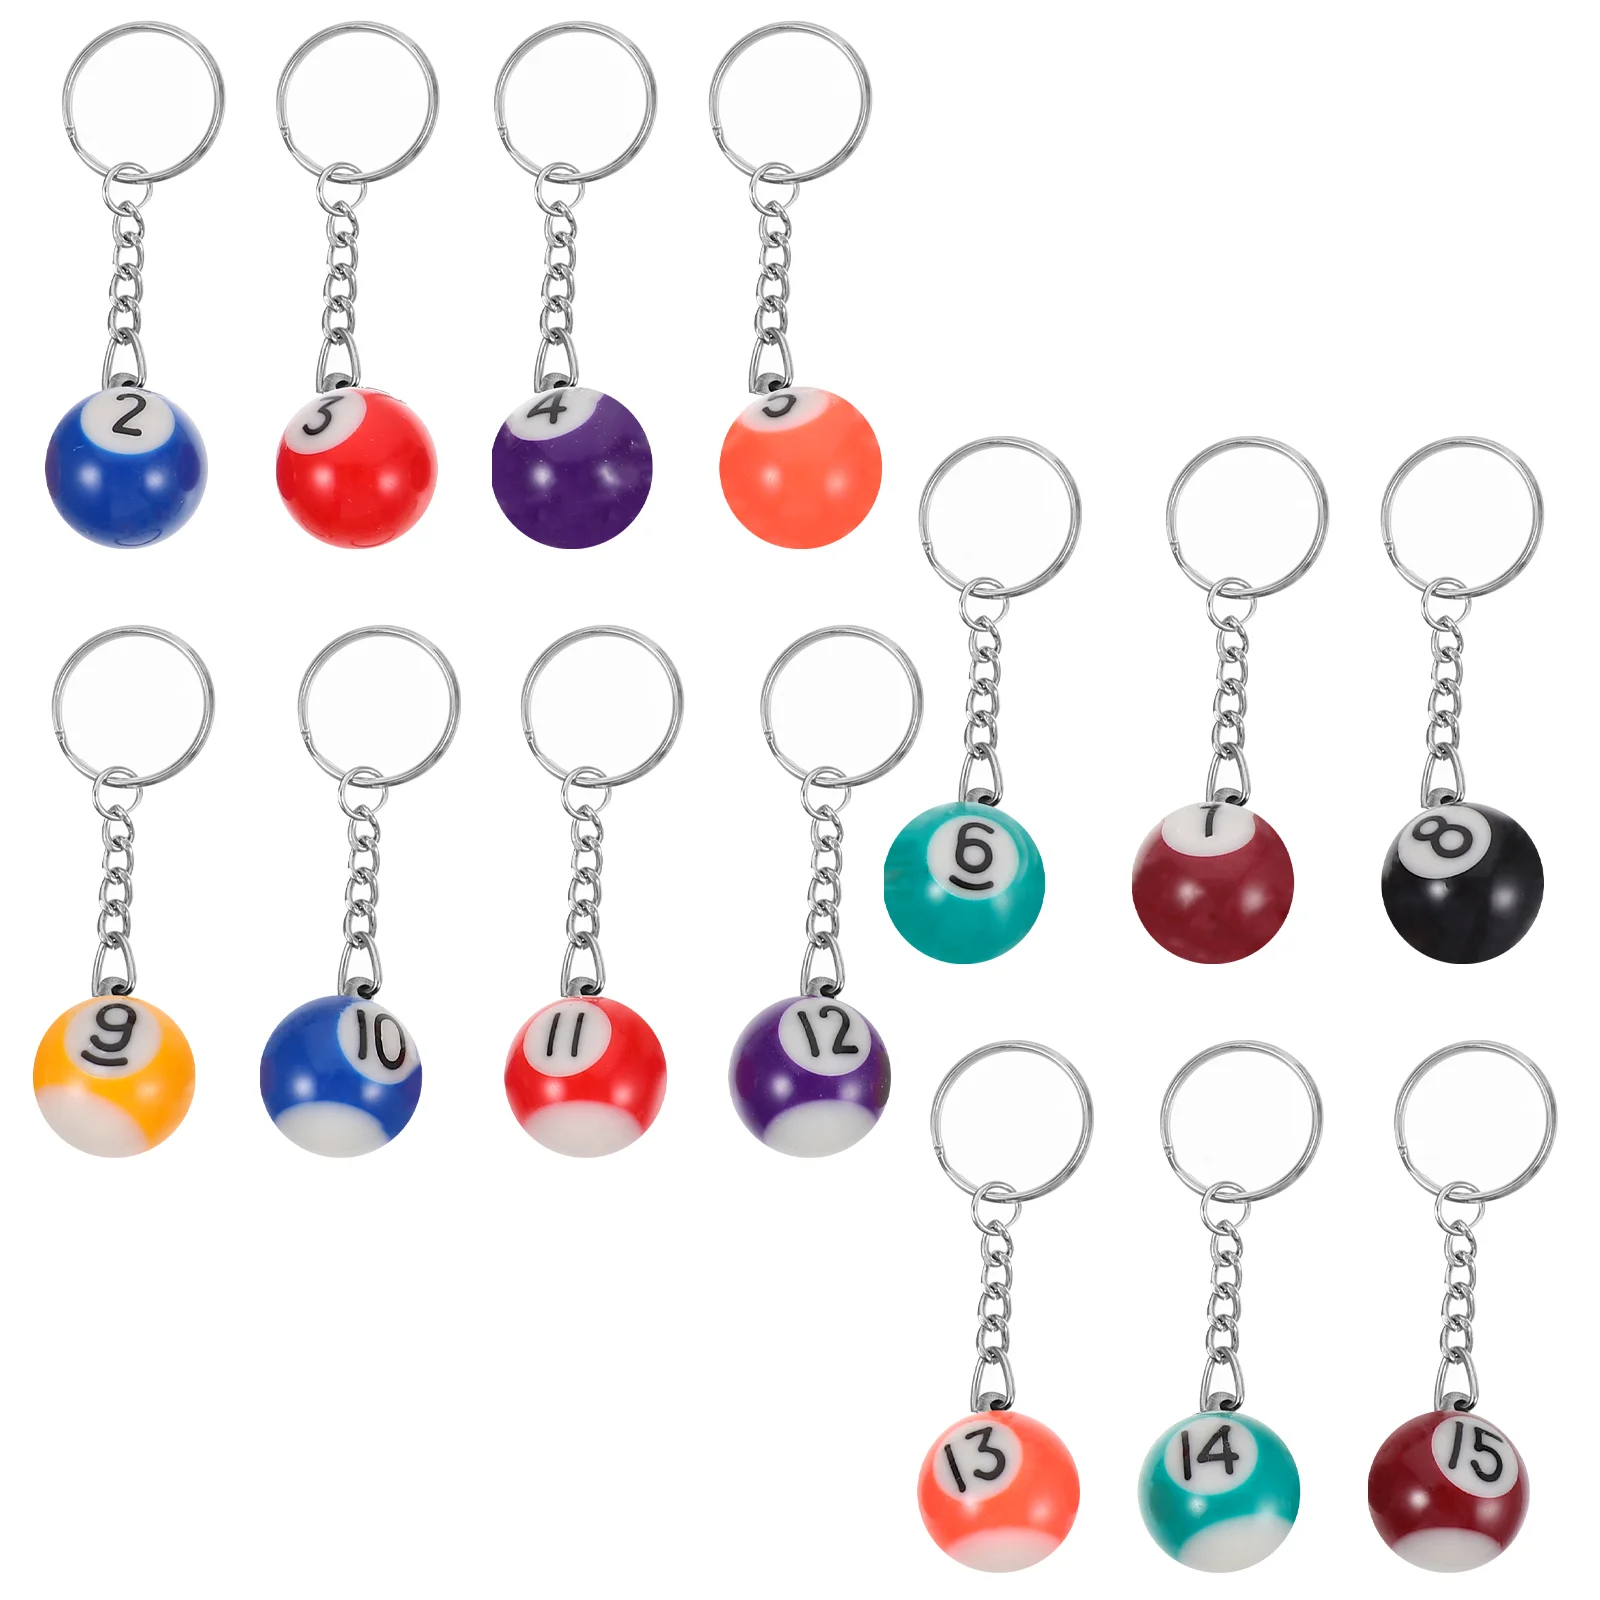 

Billiards Keychain Gifts Pool Accessories Bowling Pendant Sports Fan Key Chains Pool Player Match Keychains